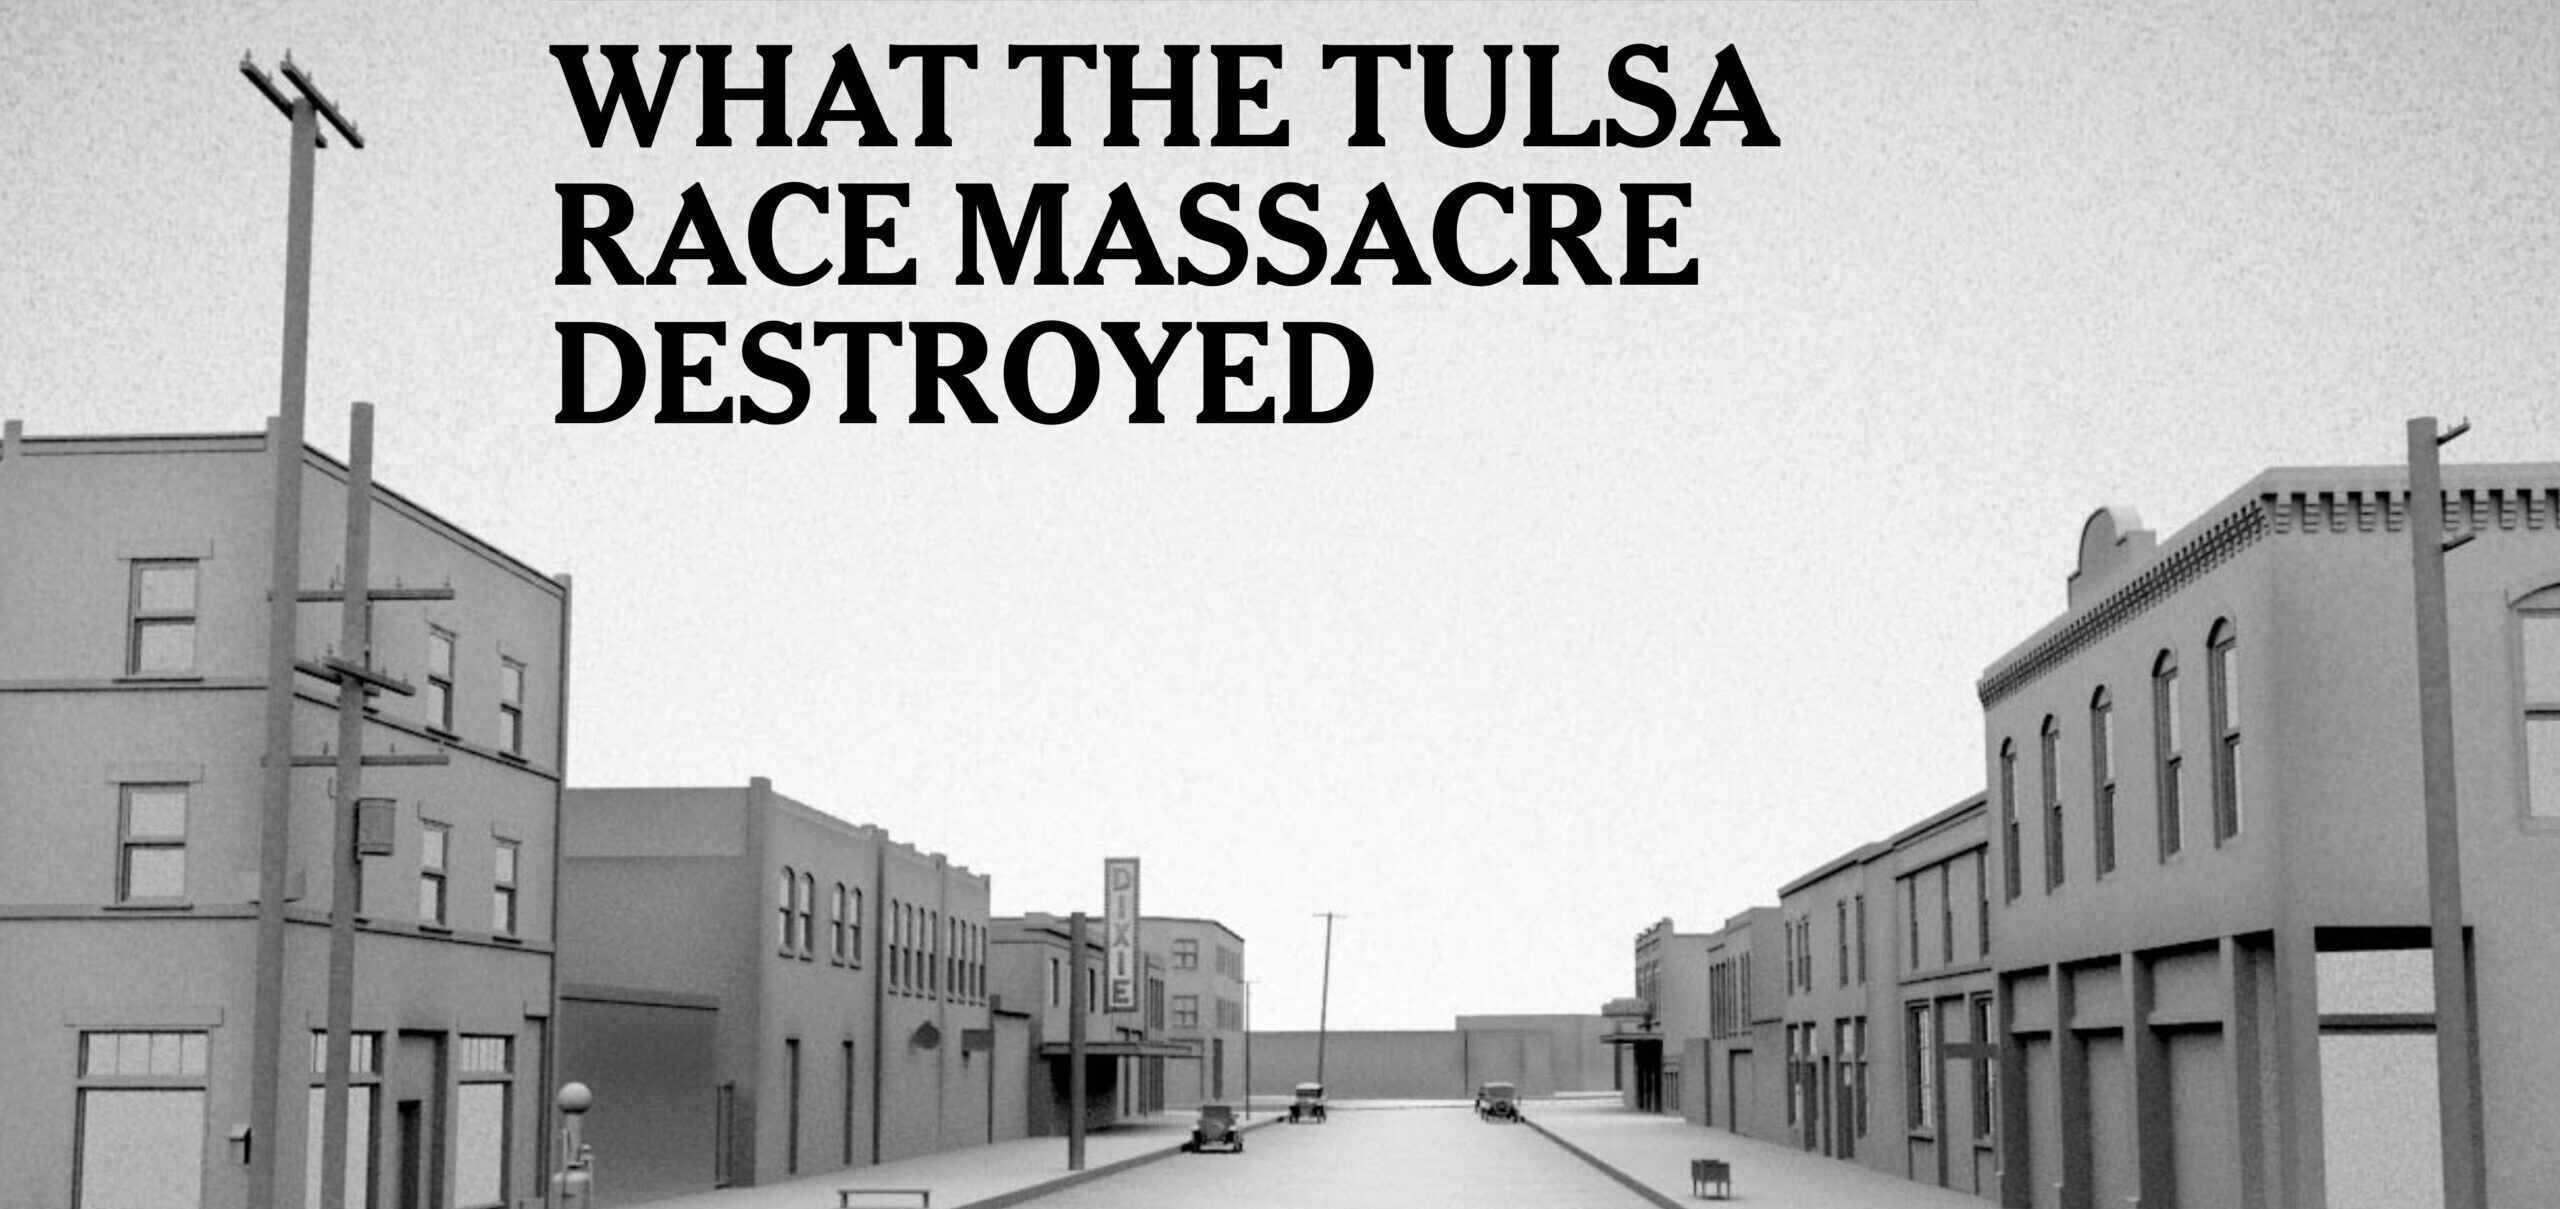 Piecing Together the Puzzle Behind the Tulsa Race Massacre